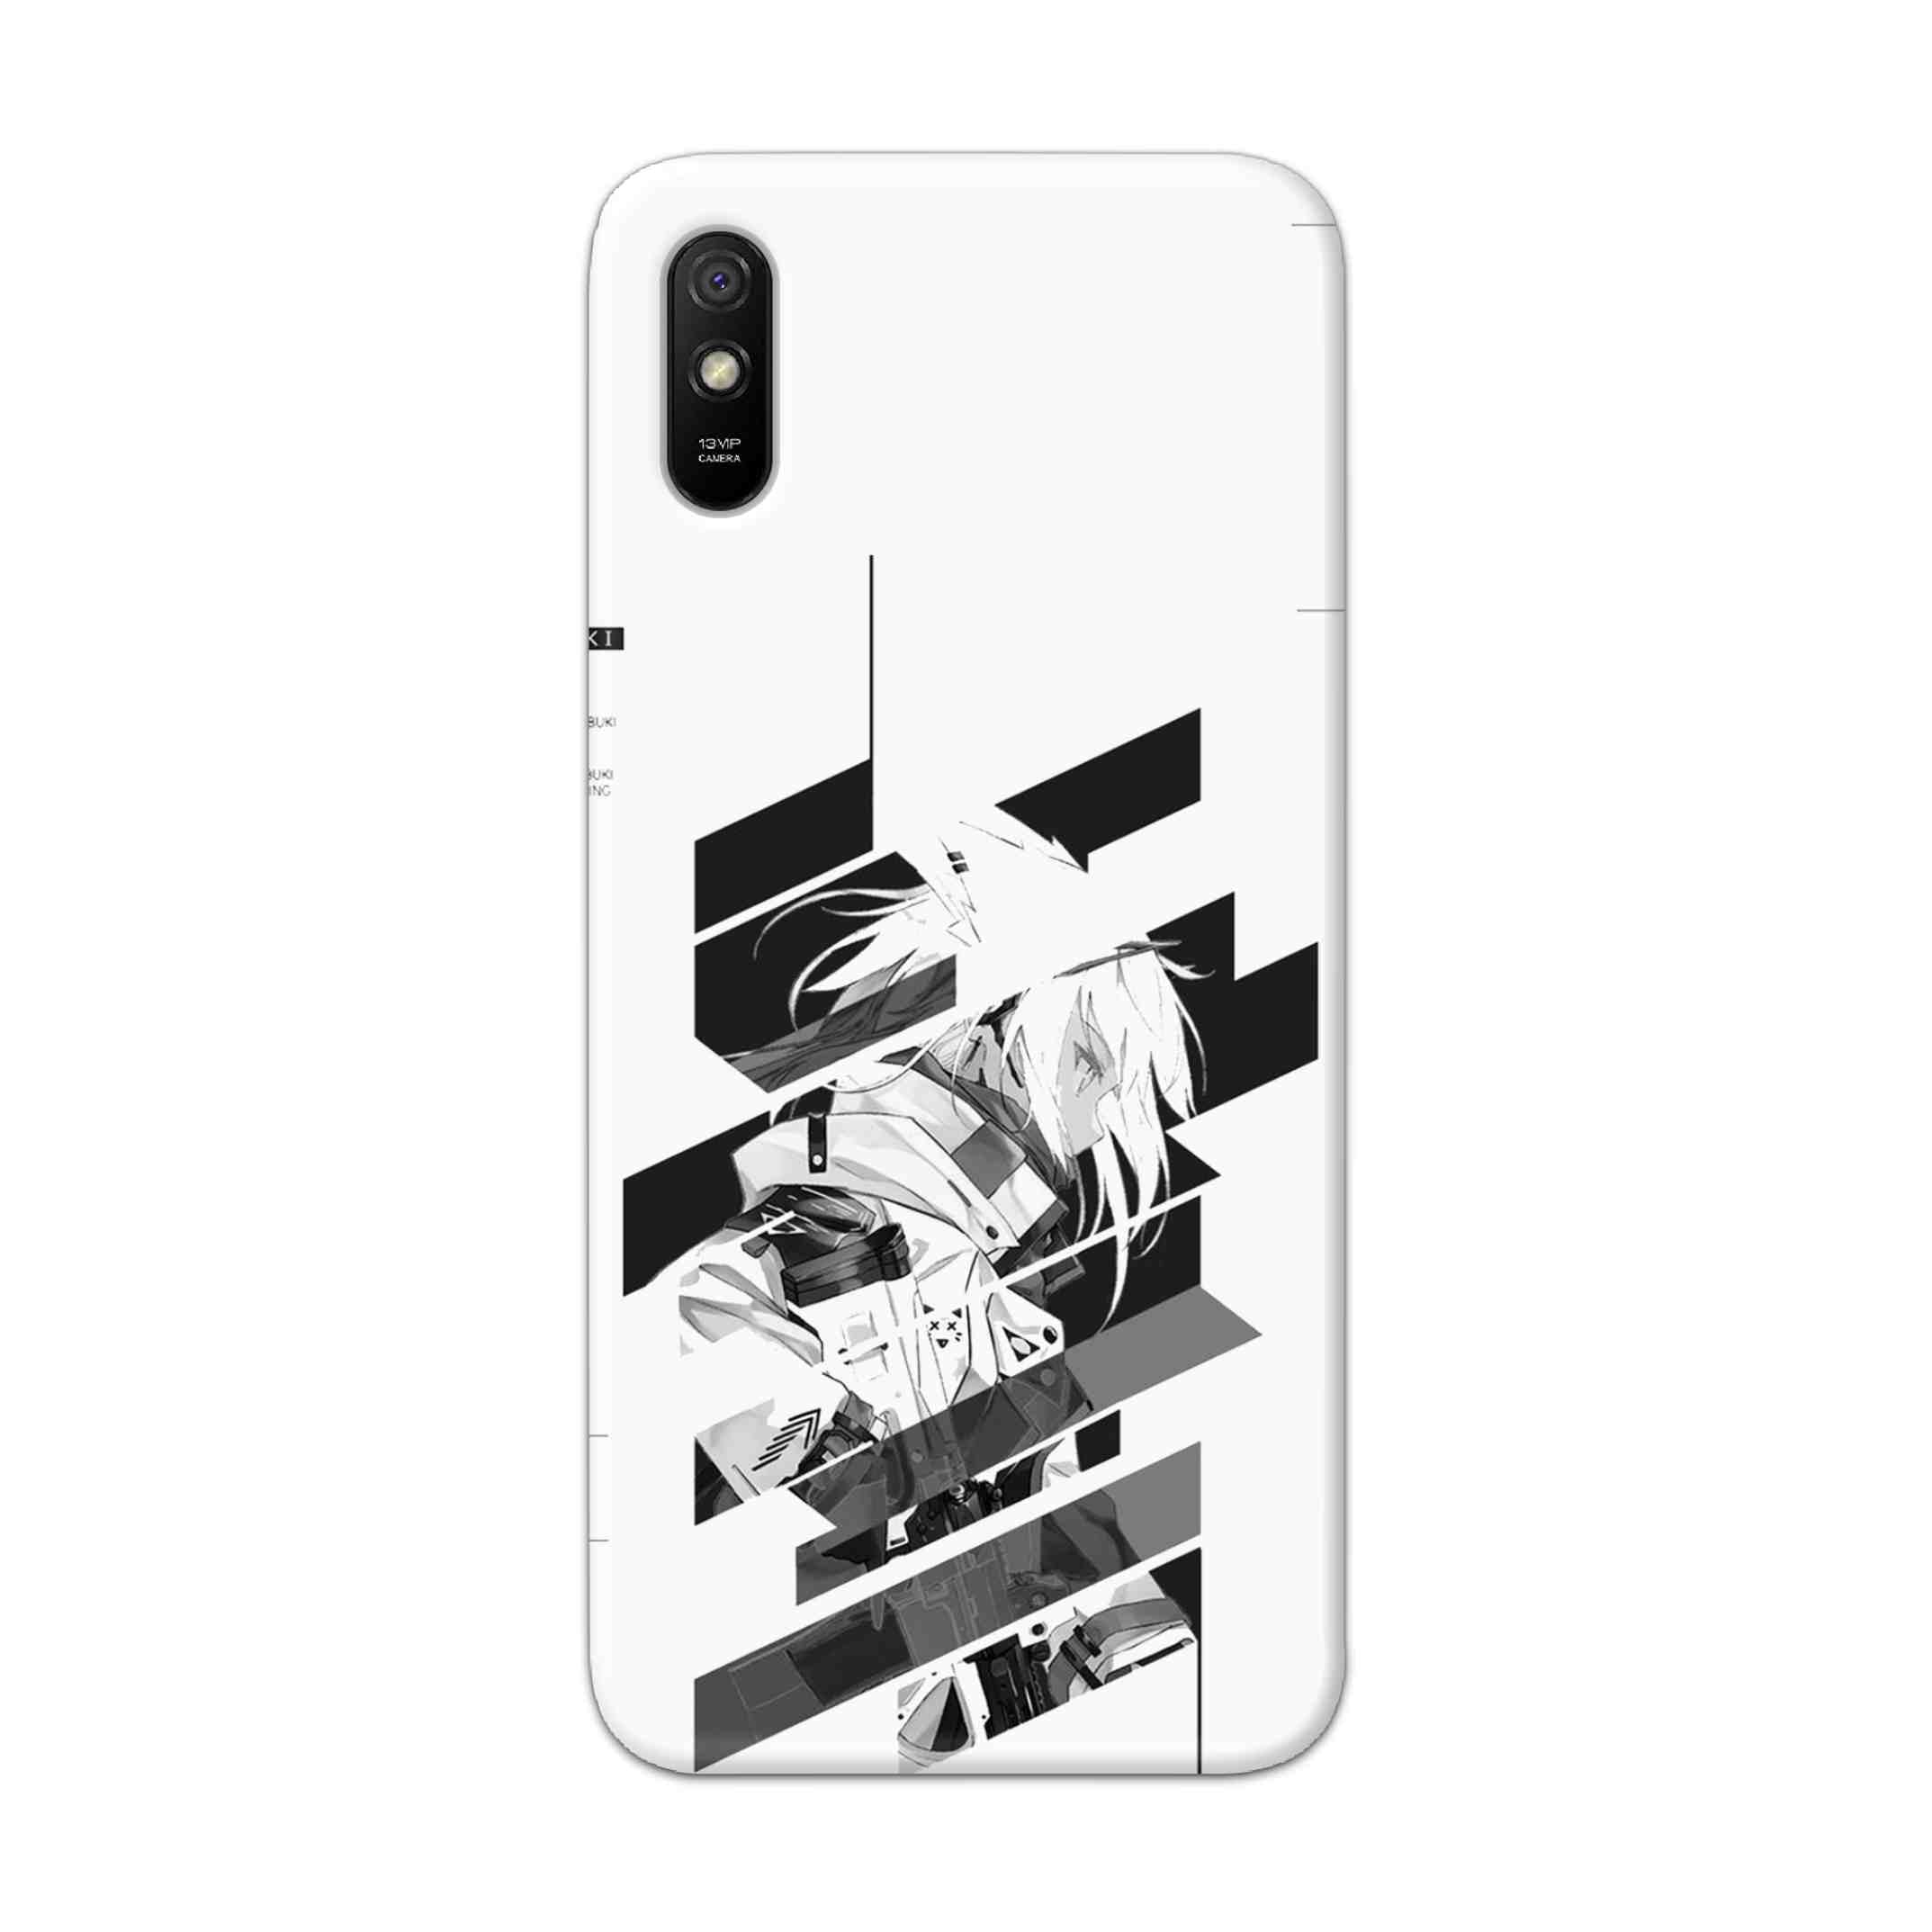 Buy Fubuki Hard Back Mobile Phone Case Cover For Redmi 9A Online